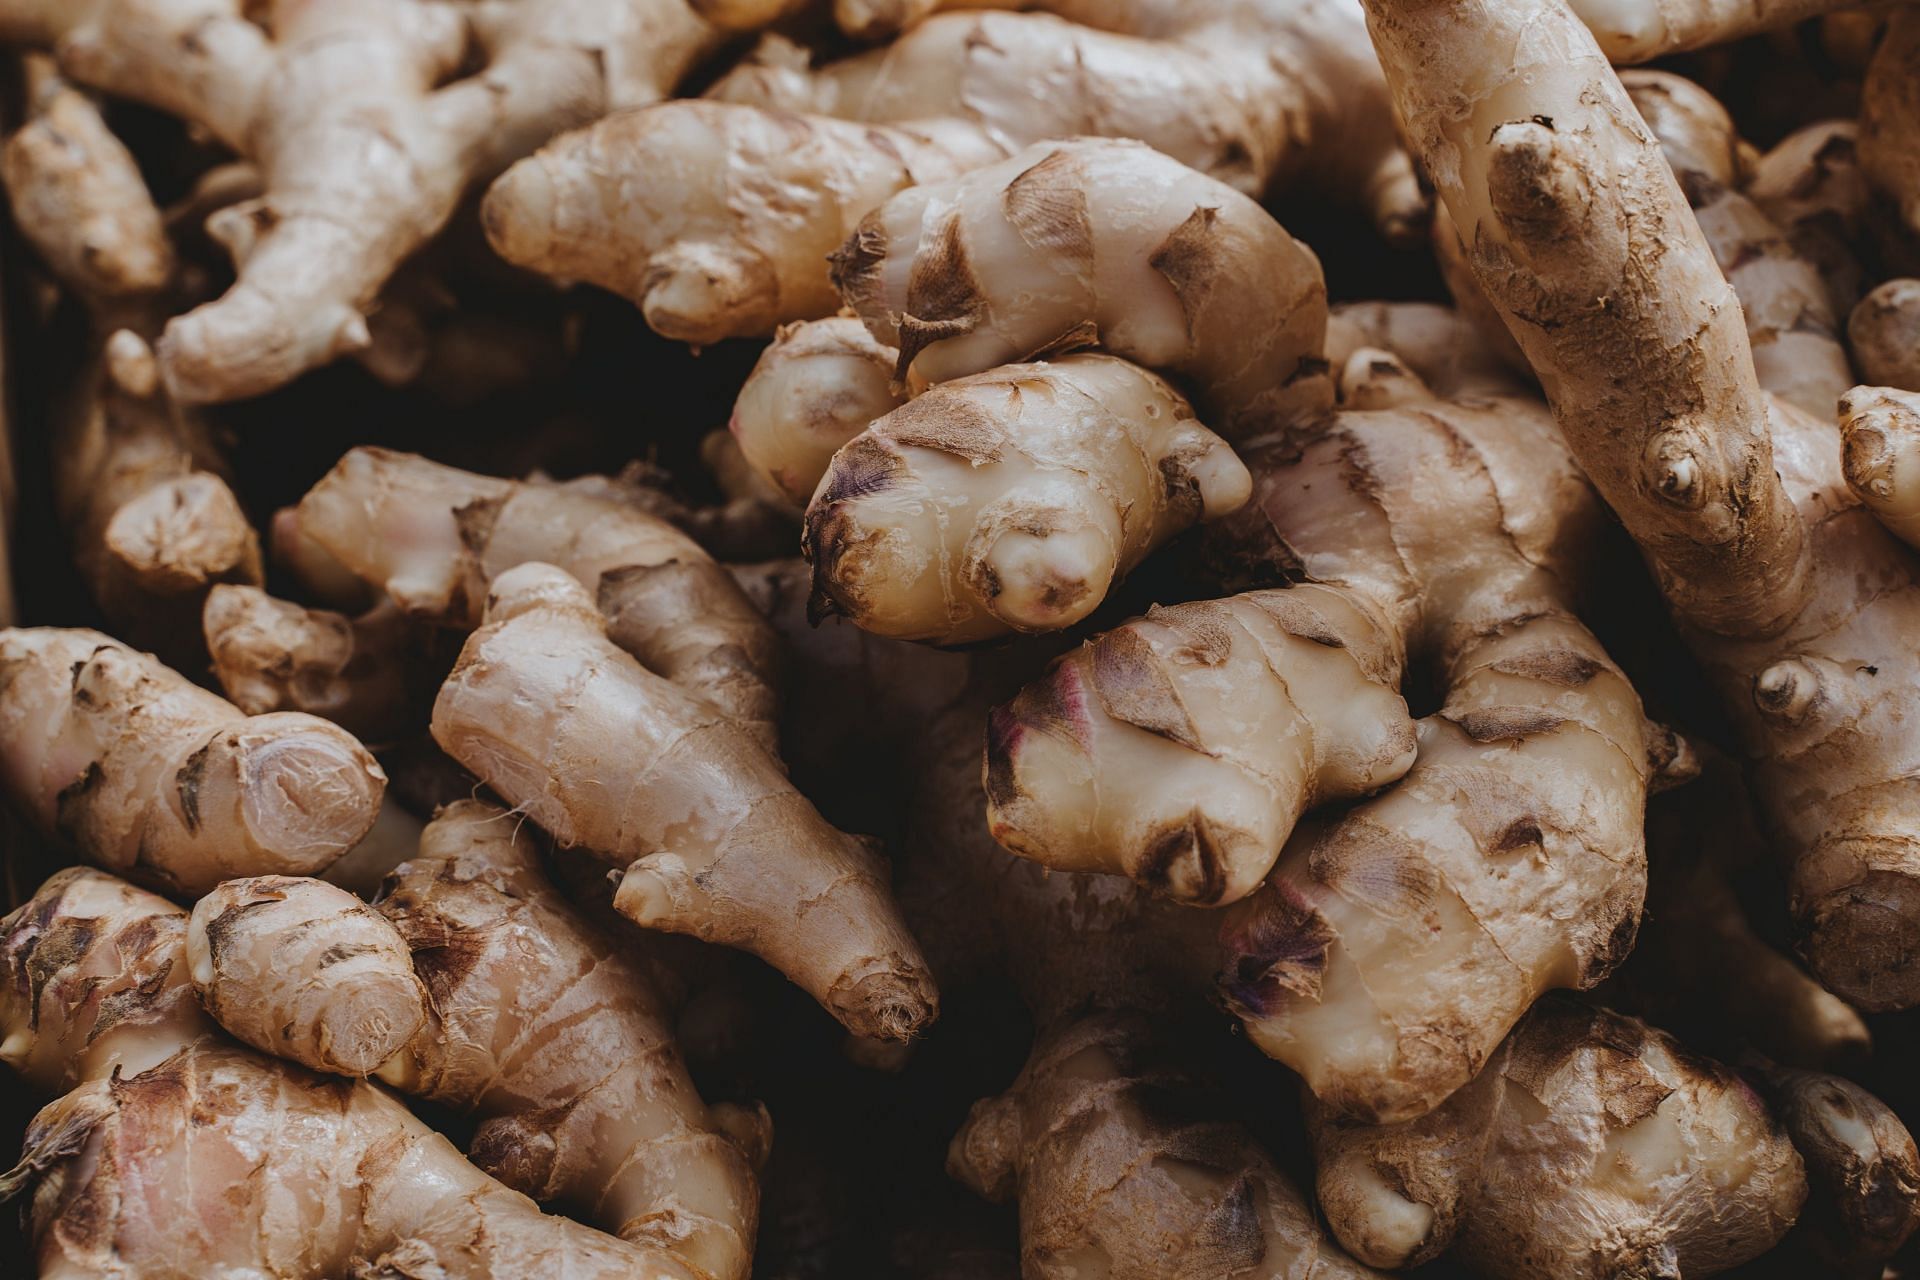 dry ginger vs fresh ginger  (image sourced via Pexels / Photo by alesia)